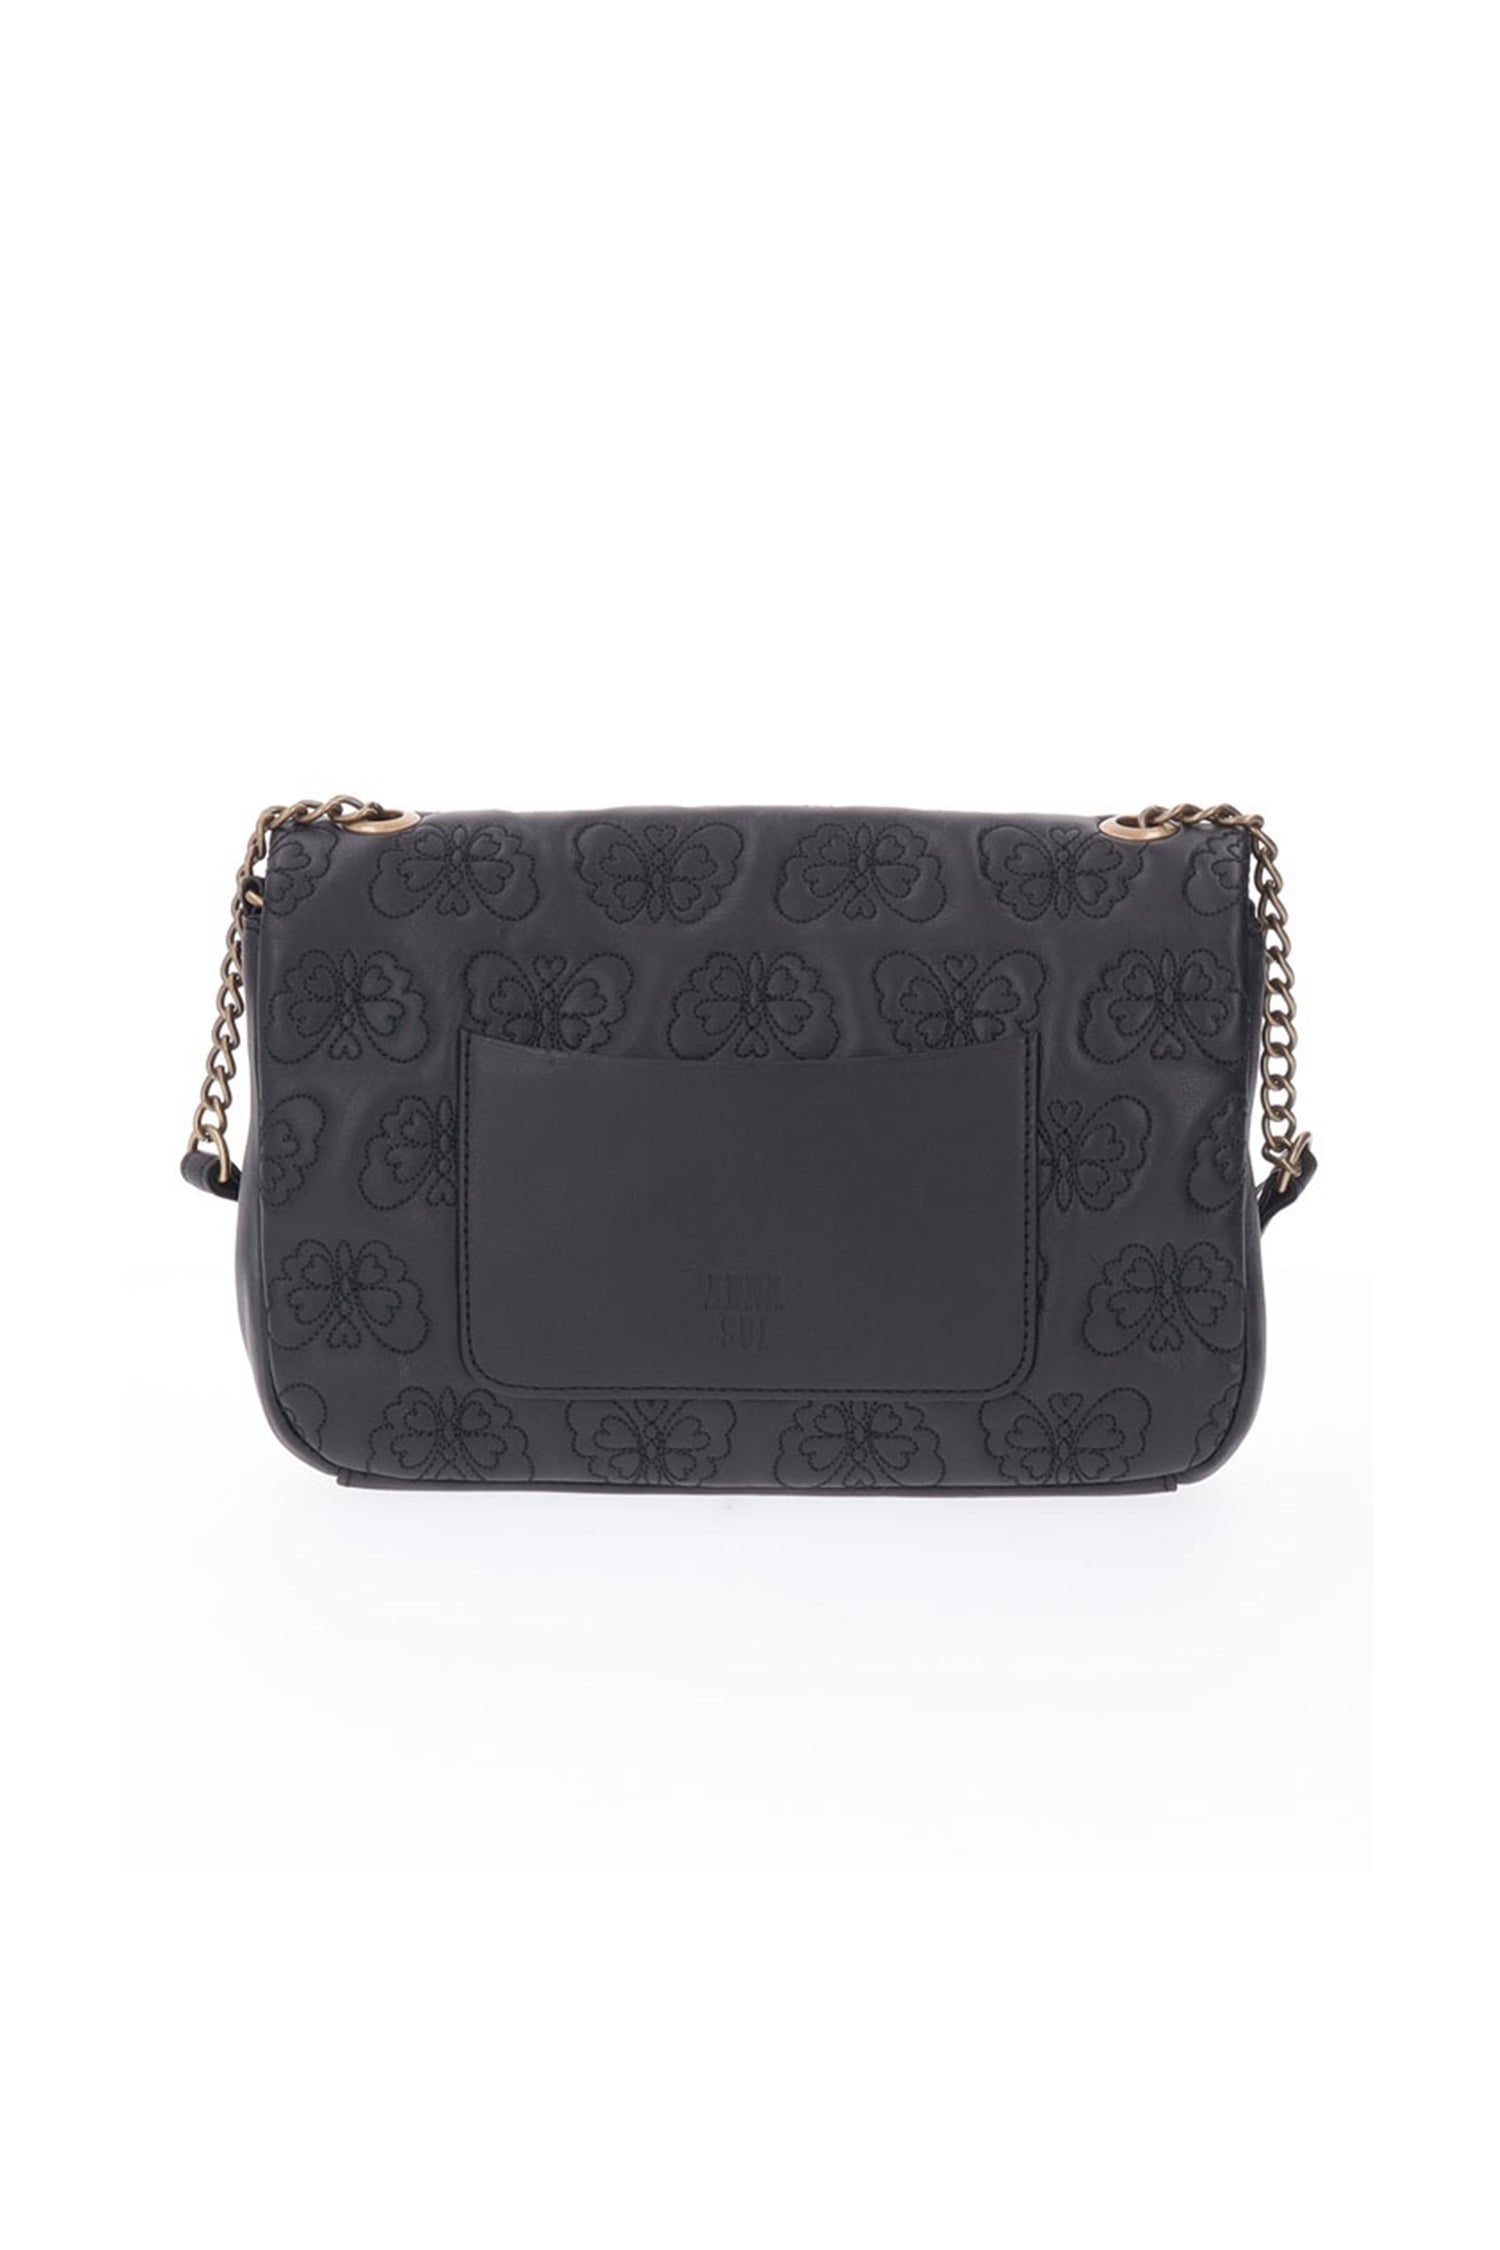 Chase Crossbody leather embossed with Anna Sui signature butterflies, a side pocket on the back